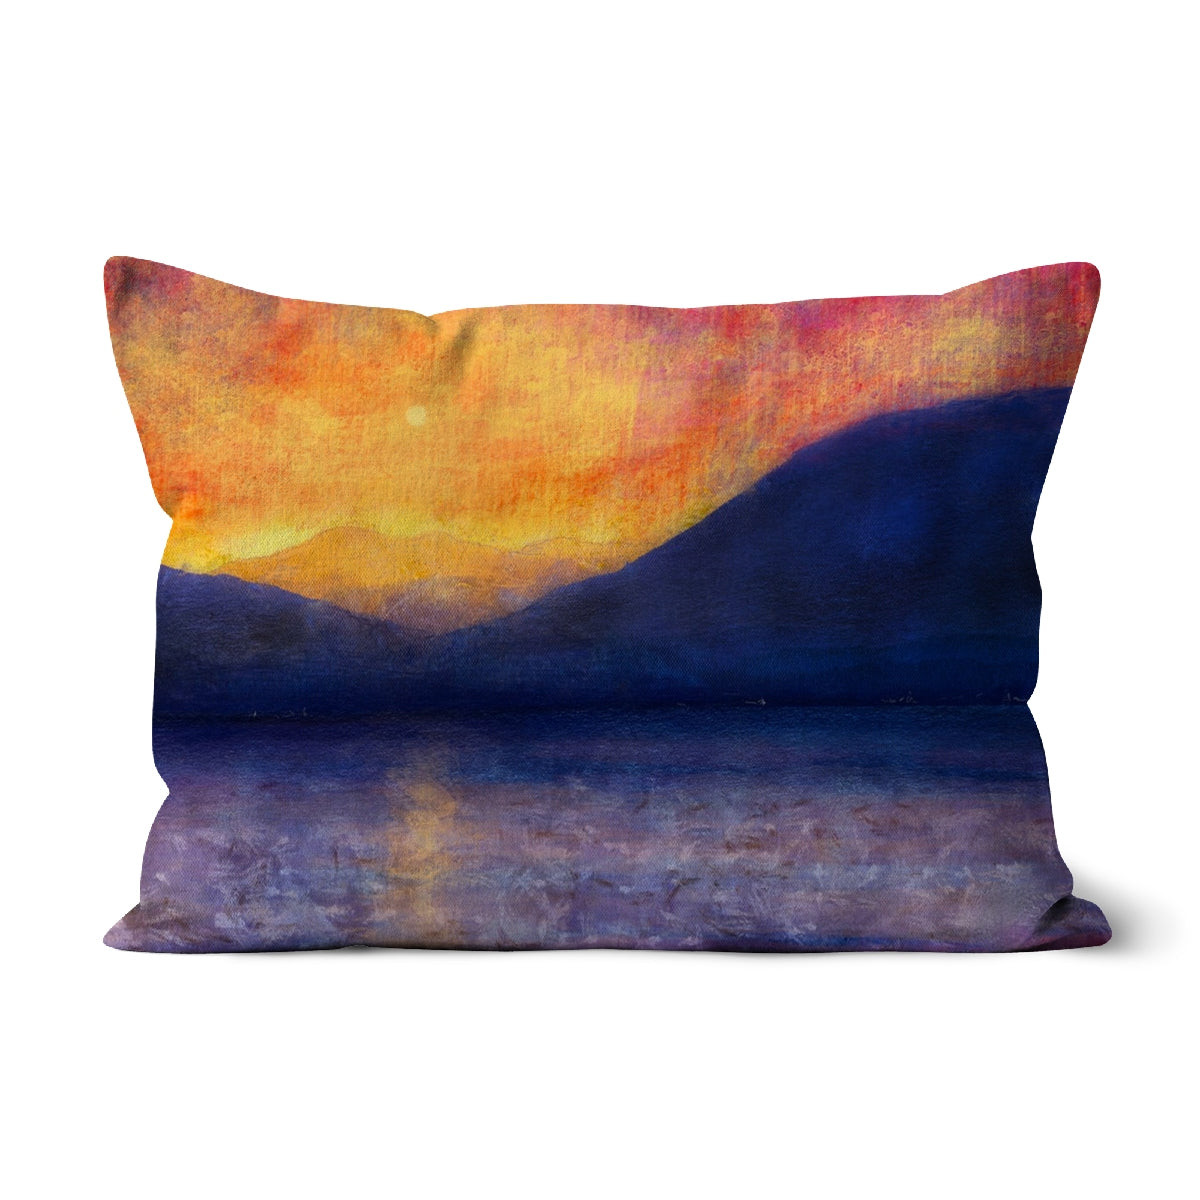 Sunset Approaching Mull Art Gifts Cushion-Cushions-Hebridean Islands Art Gallery-Faux Suede-19"x13"-Paintings, Prints, Homeware, Art Gifts From Scotland By Scottish Artist Kevin Hunter